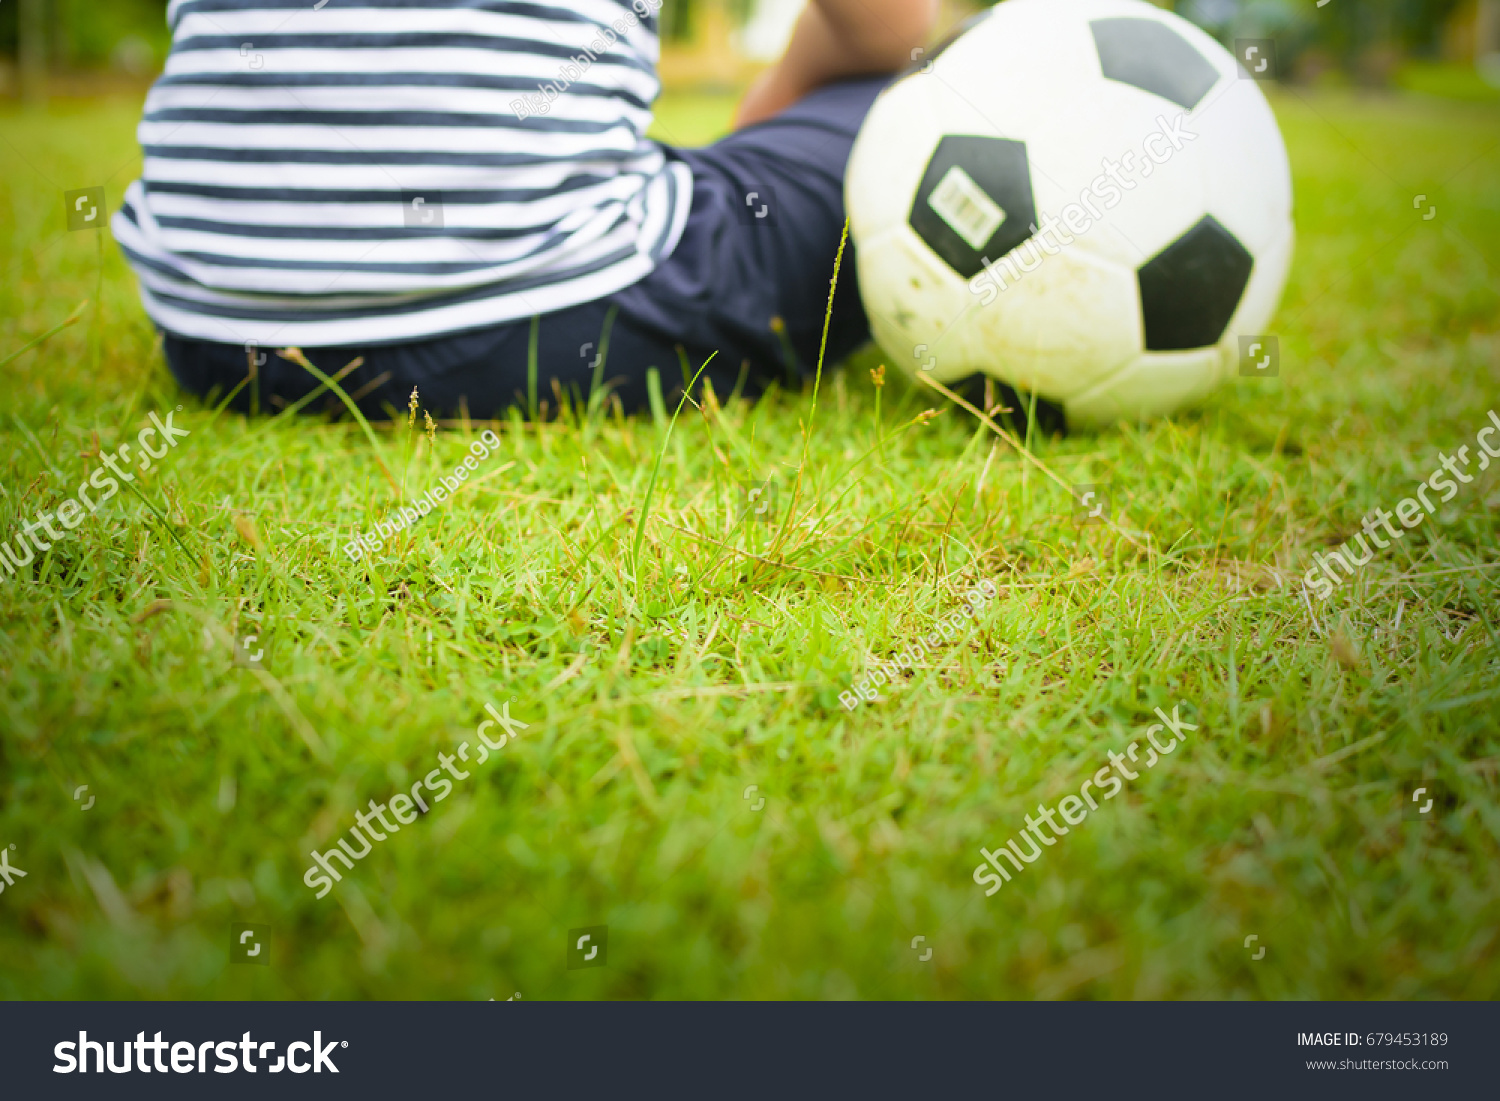 Boy with ball,Or boy with soccer and green grass(focus center of picture) #679453189